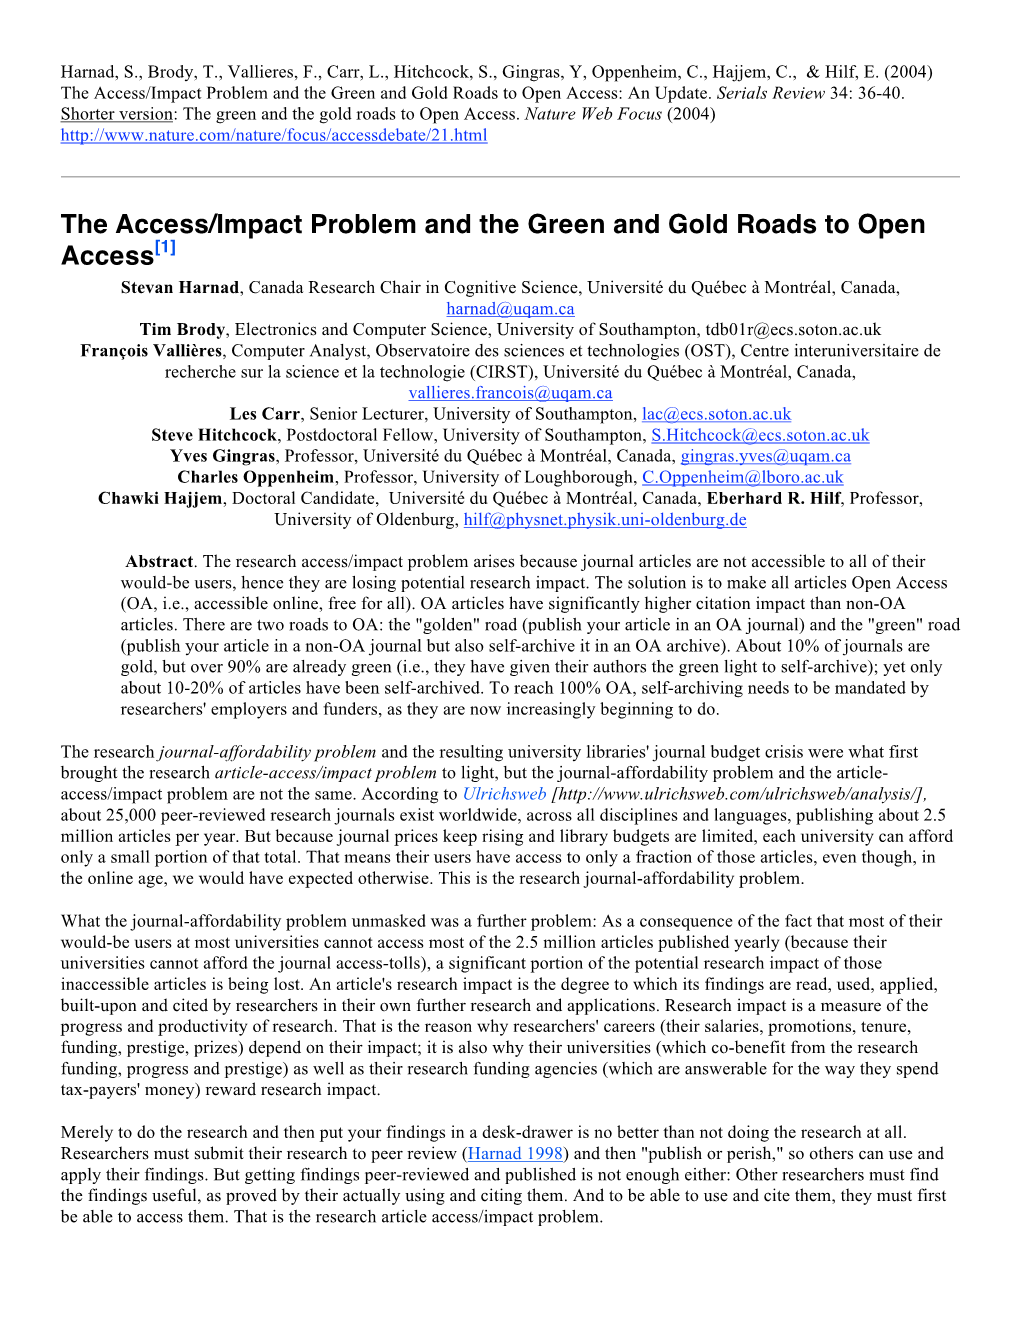 The Access/Impact Problem and the Green and Gold Roads to Open Access: an Update